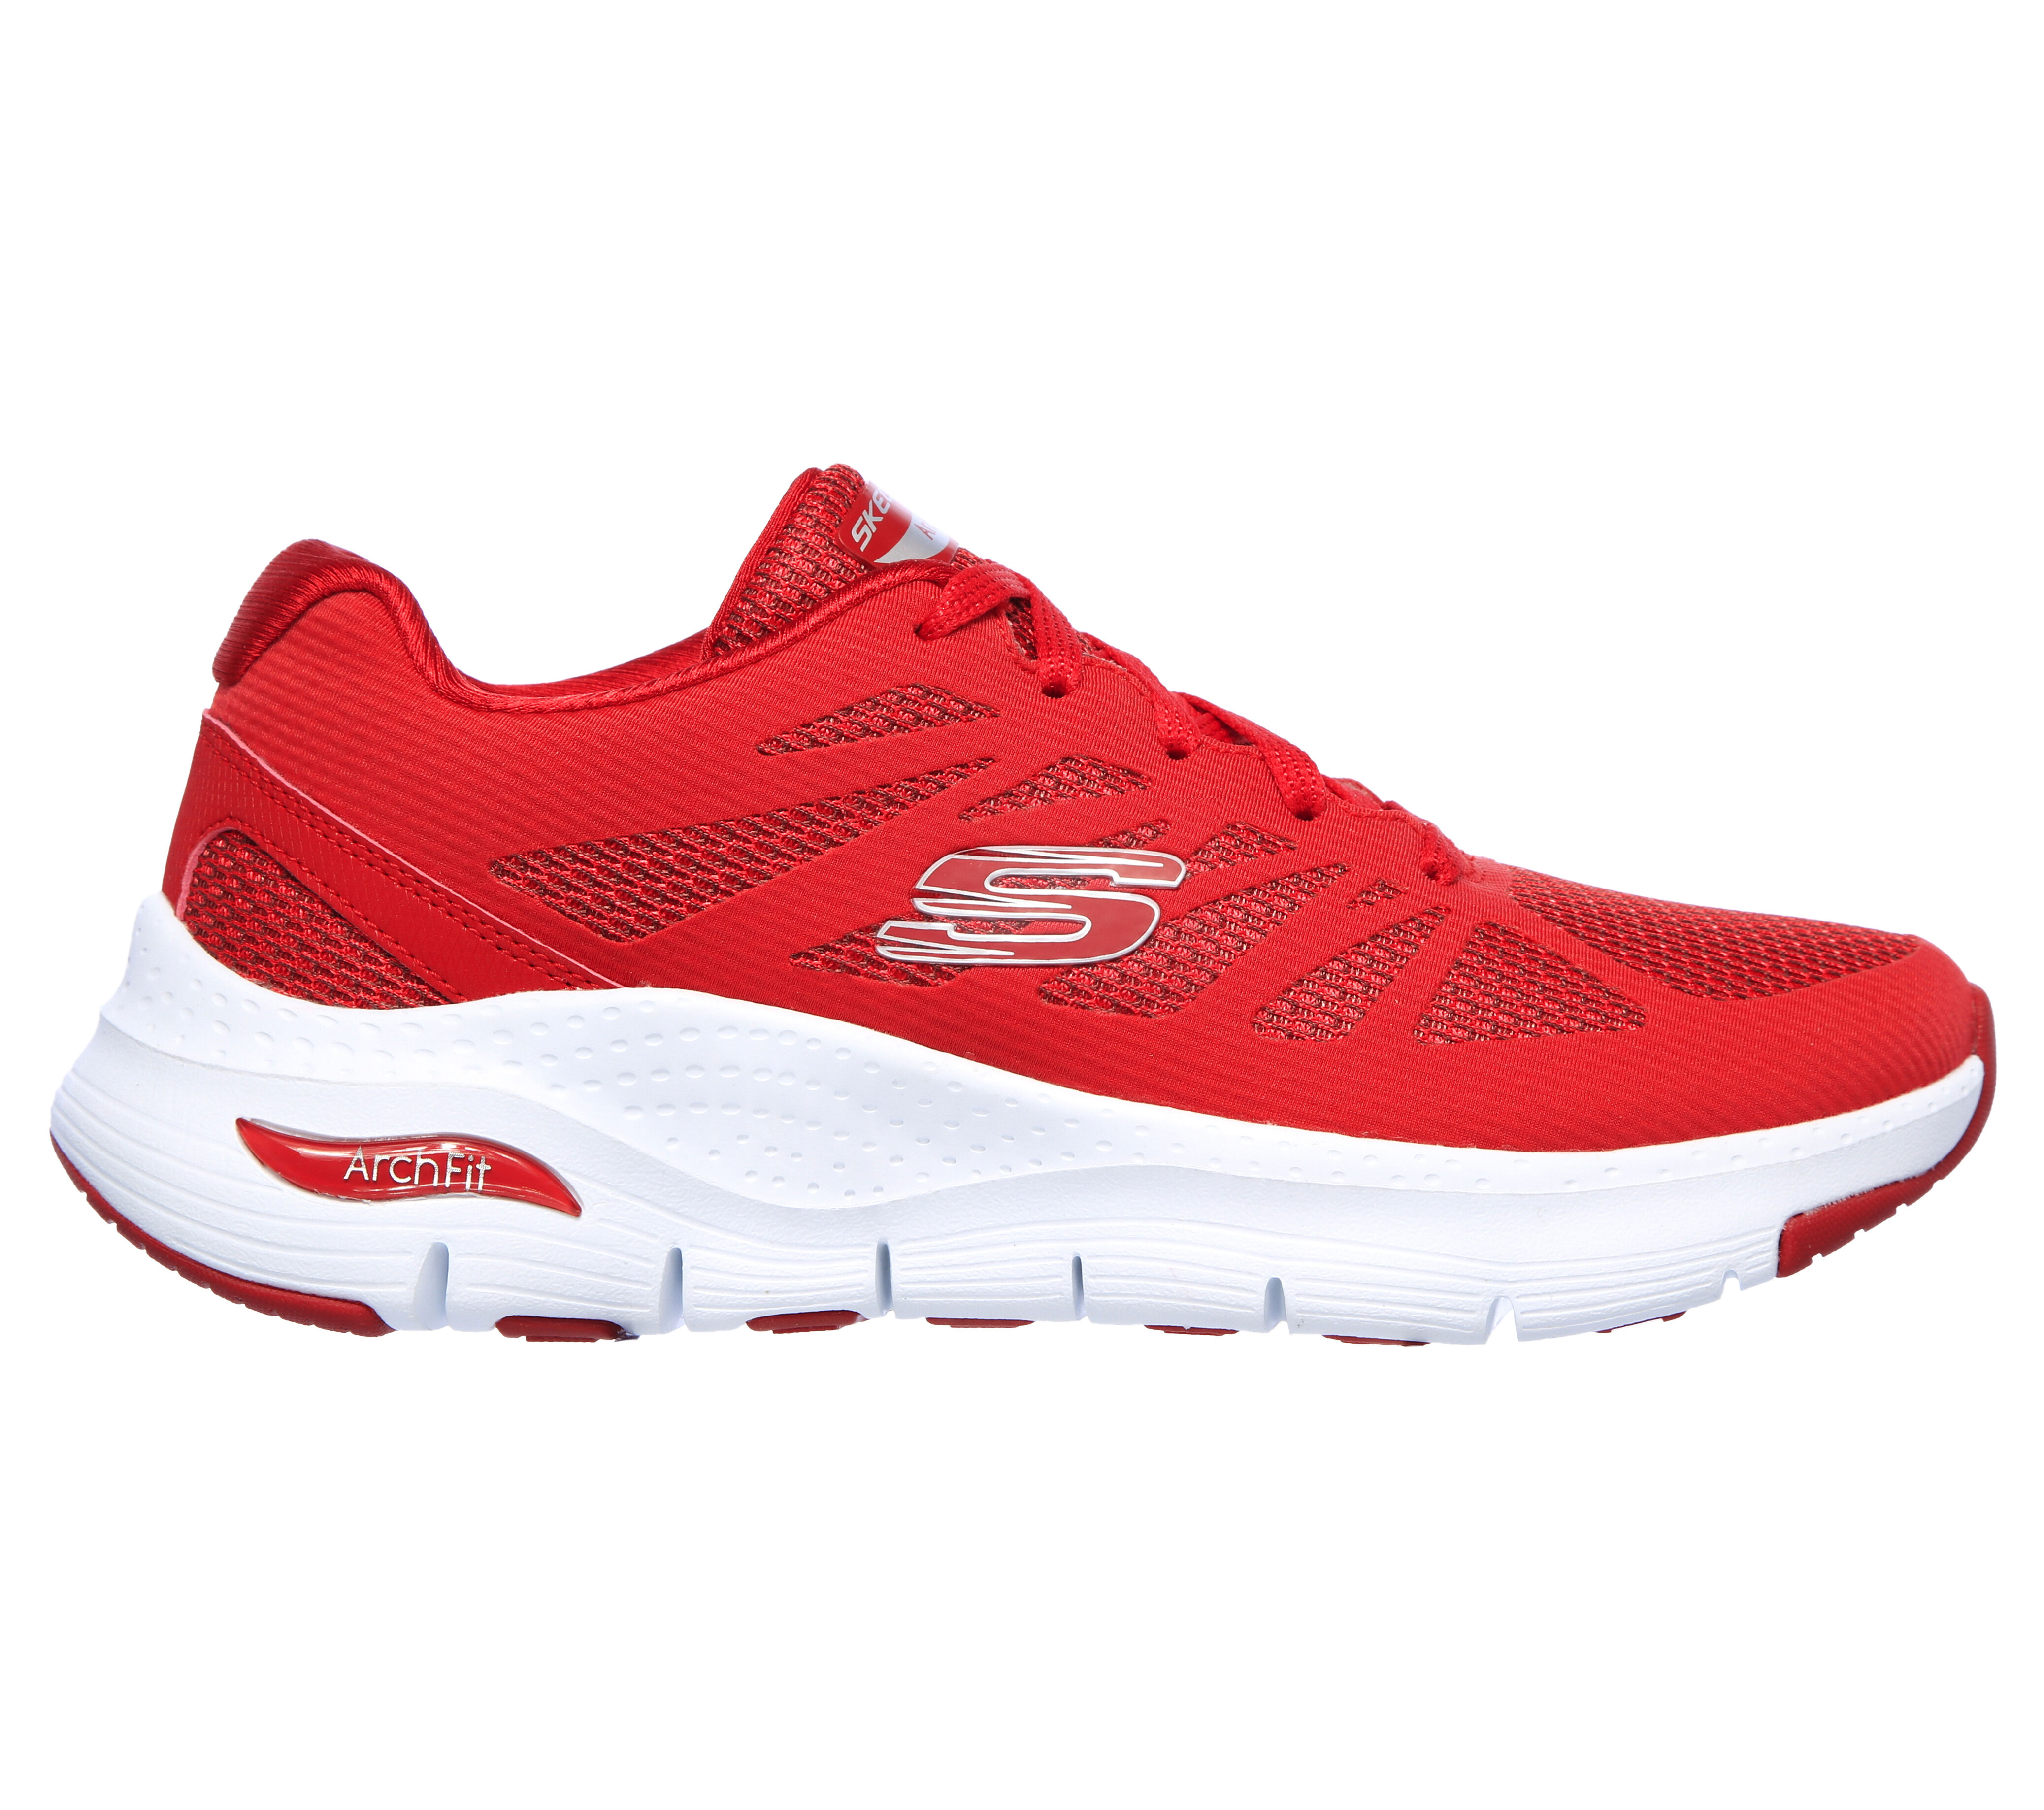 skechers collection made in italy